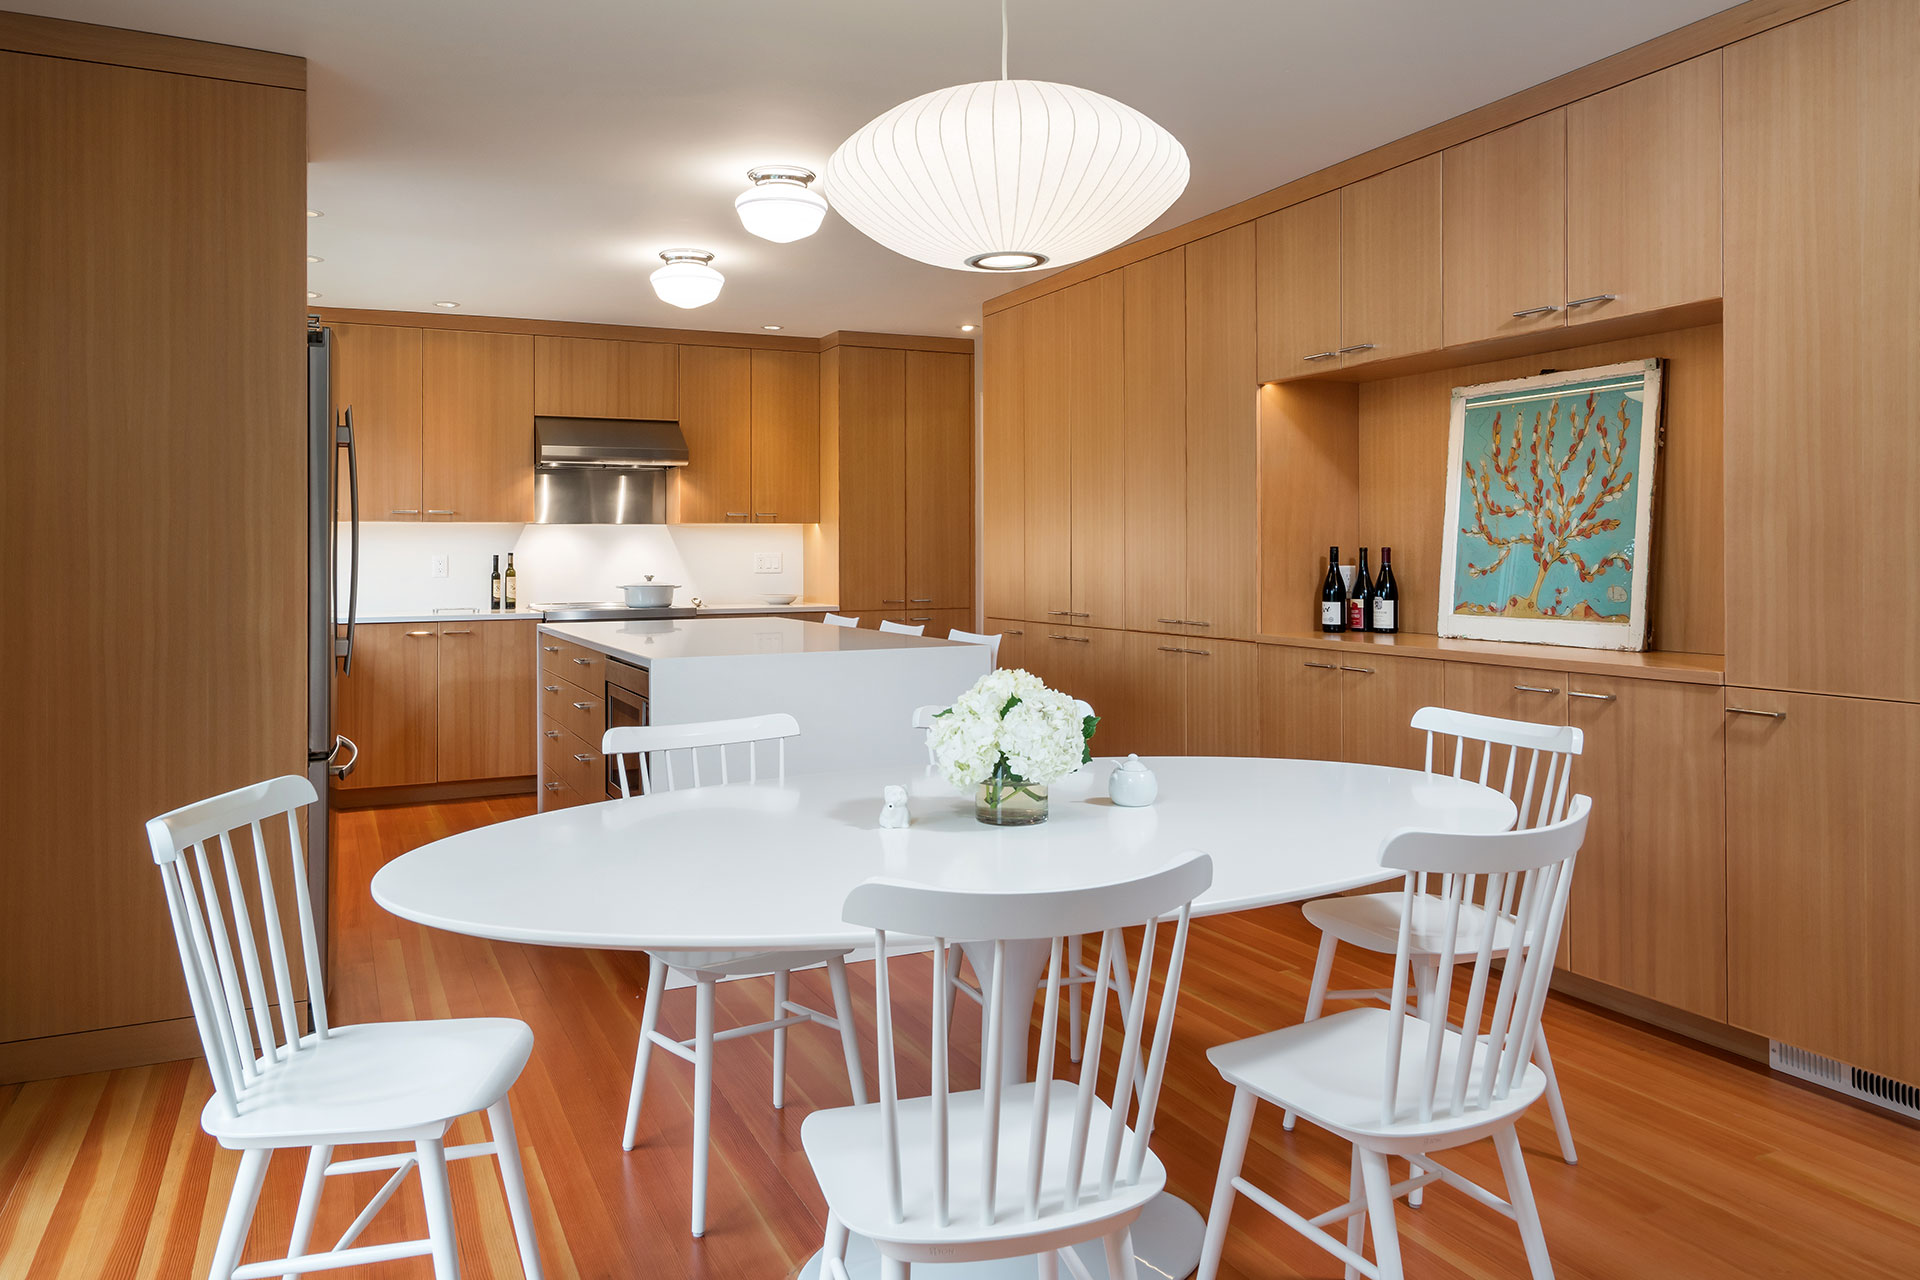 After the kitchen remodel was completed, the kitchen and dining room are open to each other.